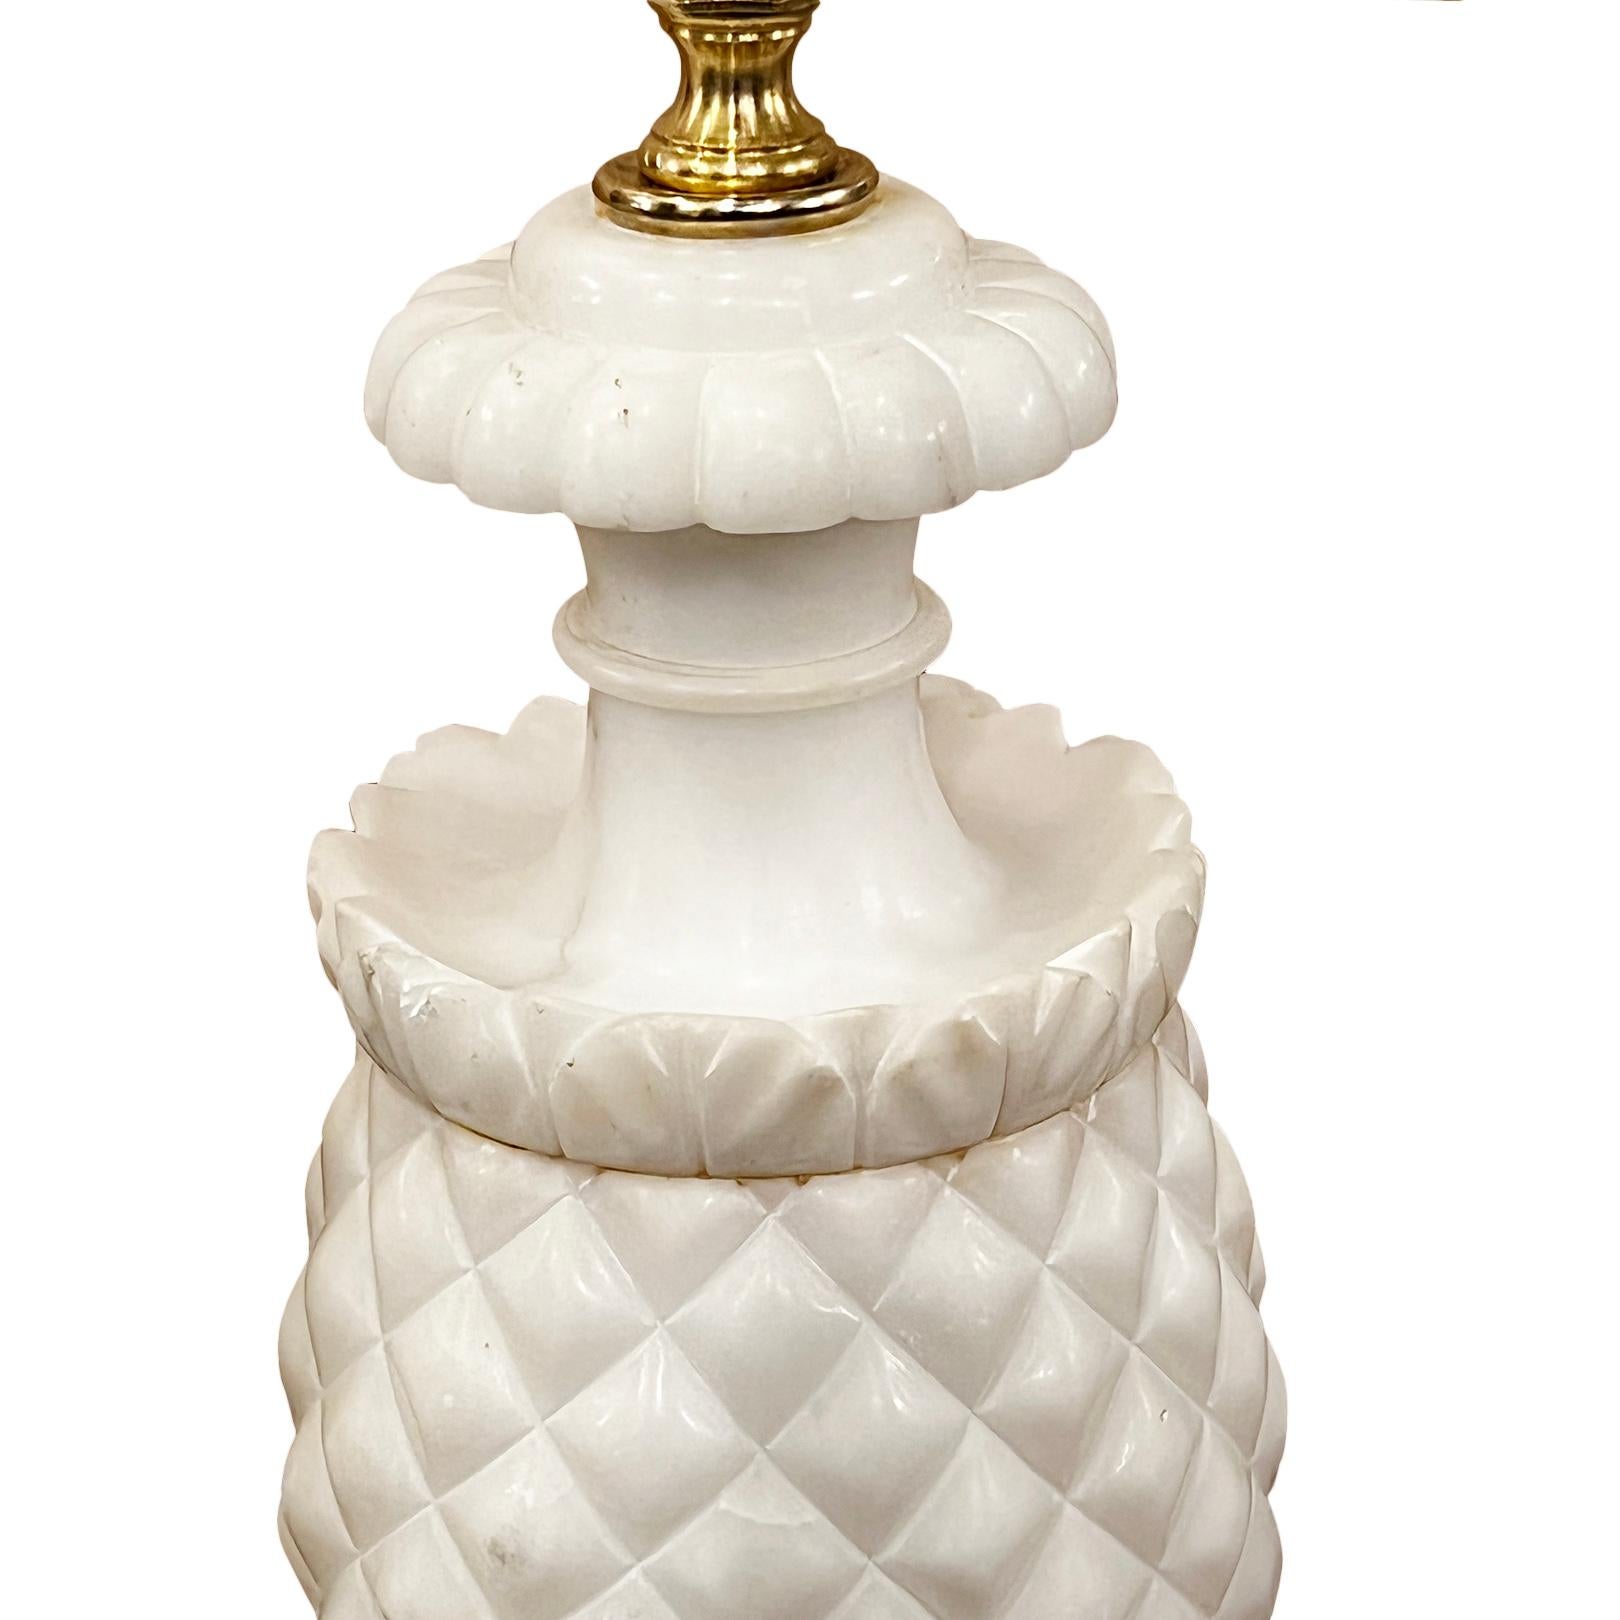 Pair of Italian circa 1950's carved alabaster lamps in the shape of pineapples.

Measurements:
Height of body: 18